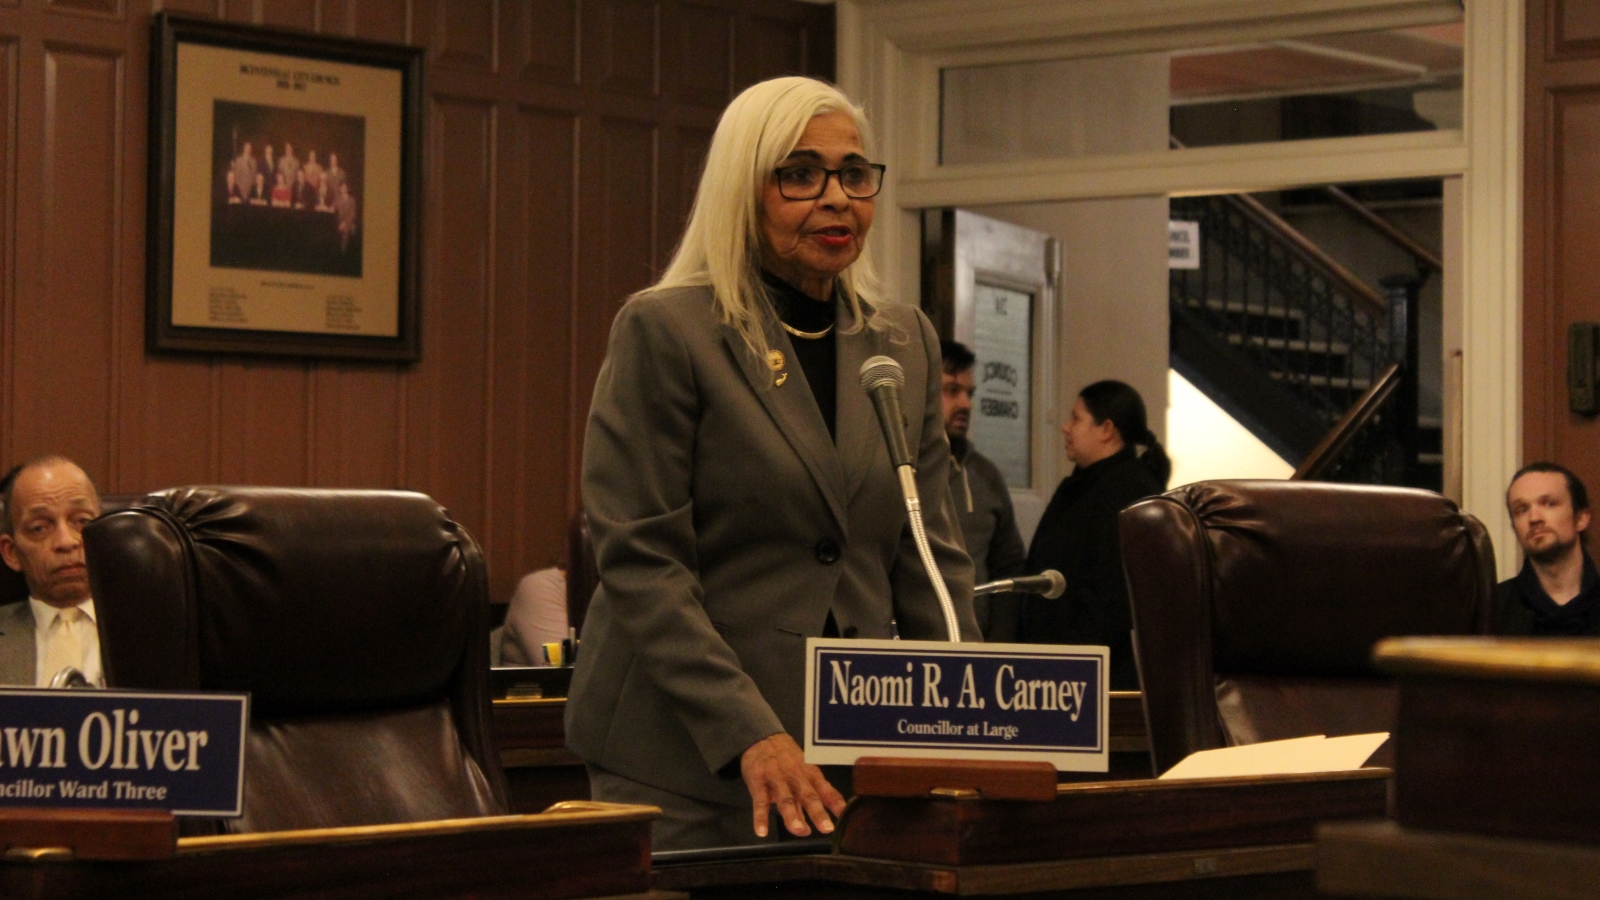 Less than a month after approving a ballot question, Councilor Naomi Carney supported the mayor's choice to veto it. 